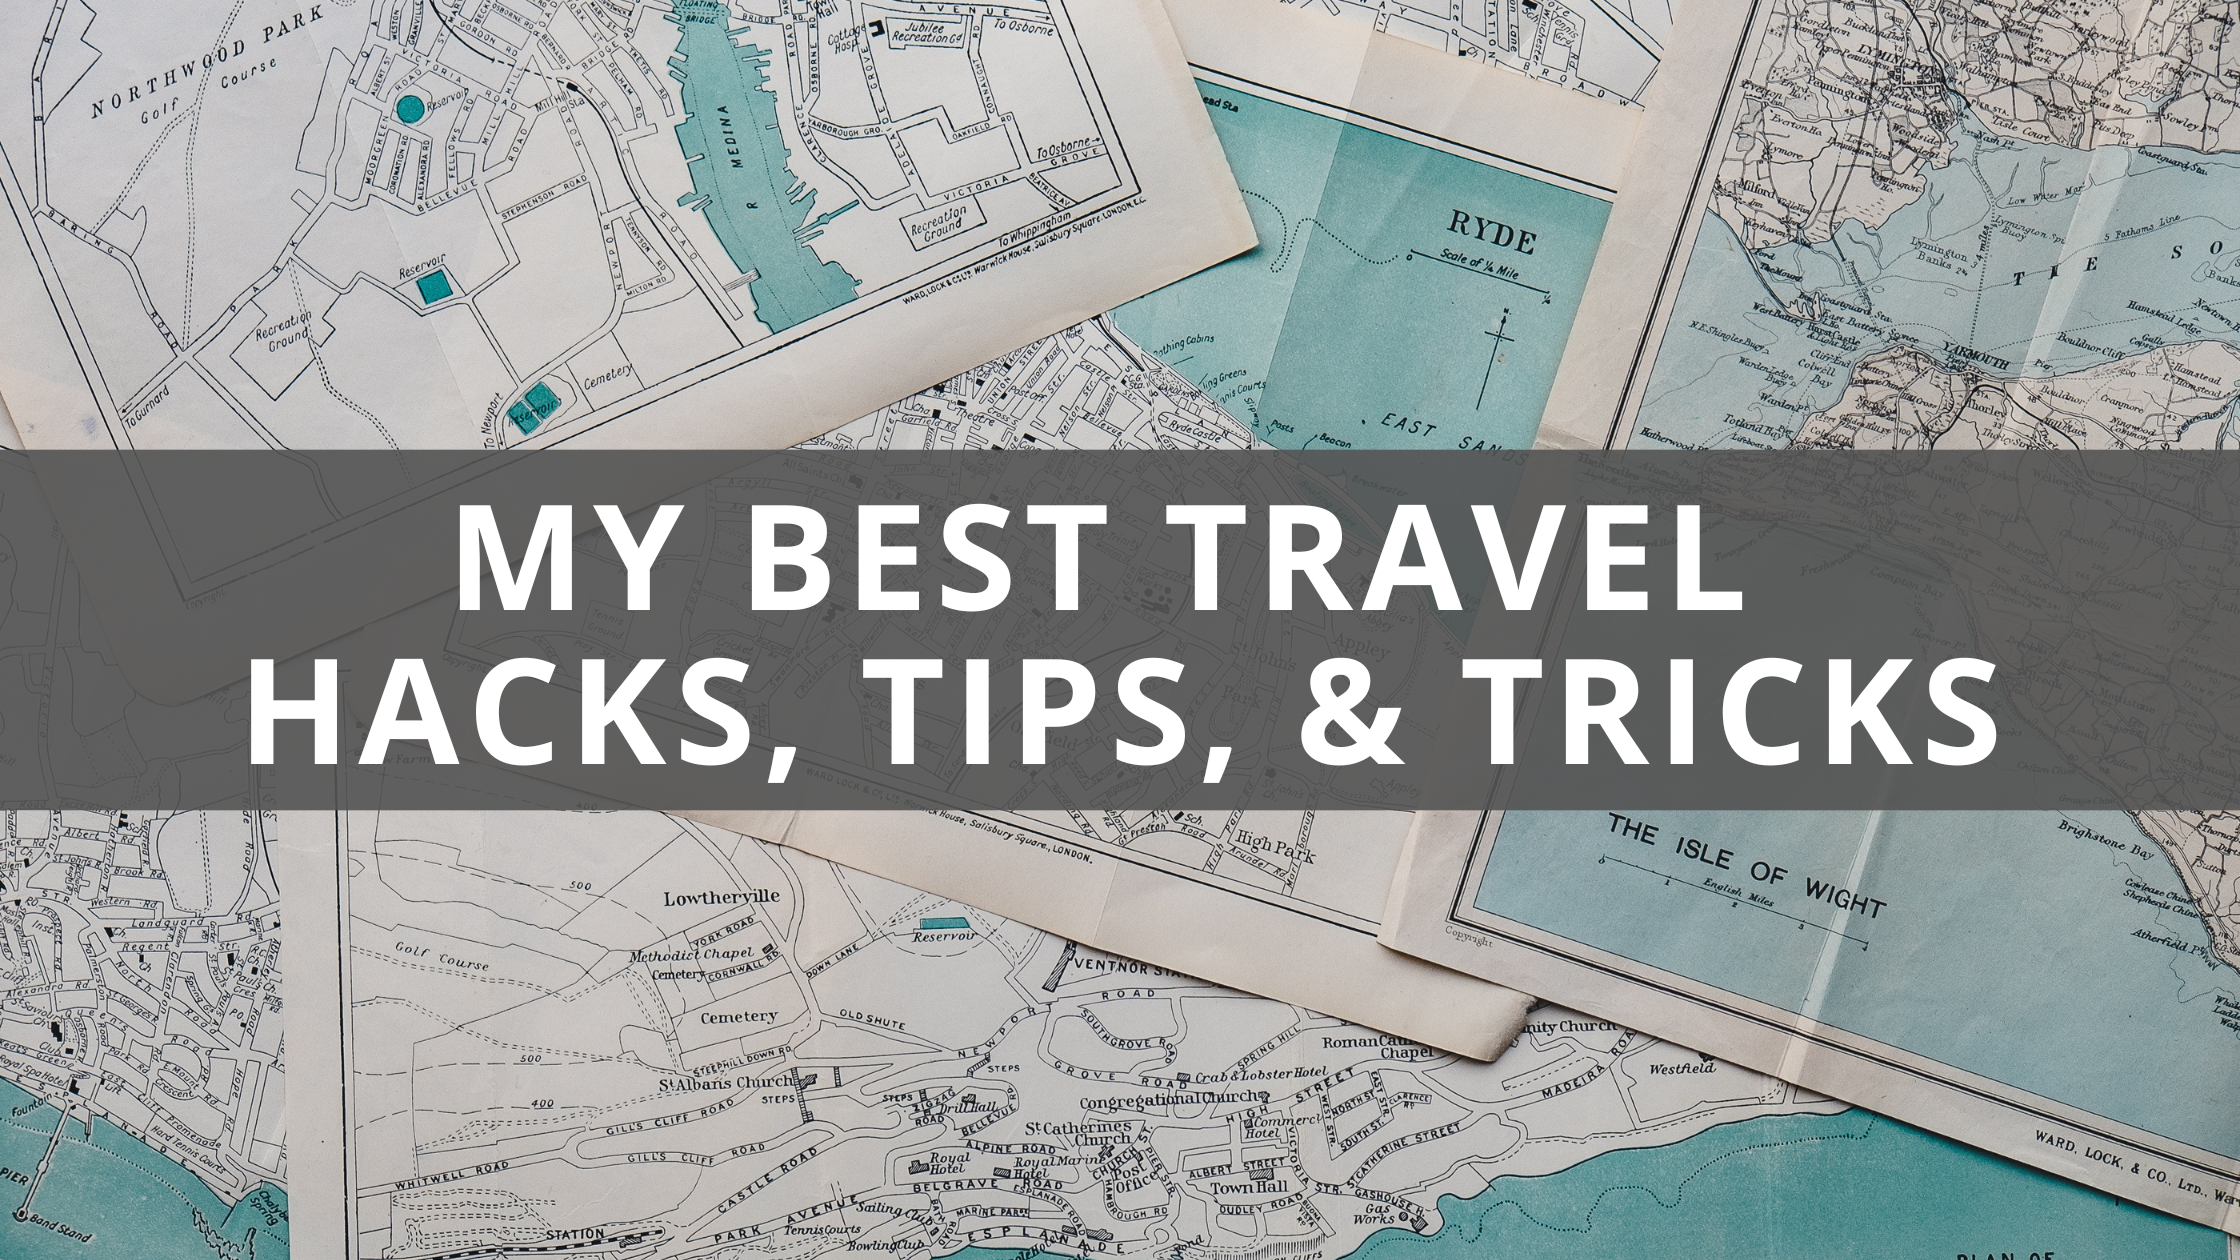 My 10+ Best Travel Tips, Tricks, and Hacks